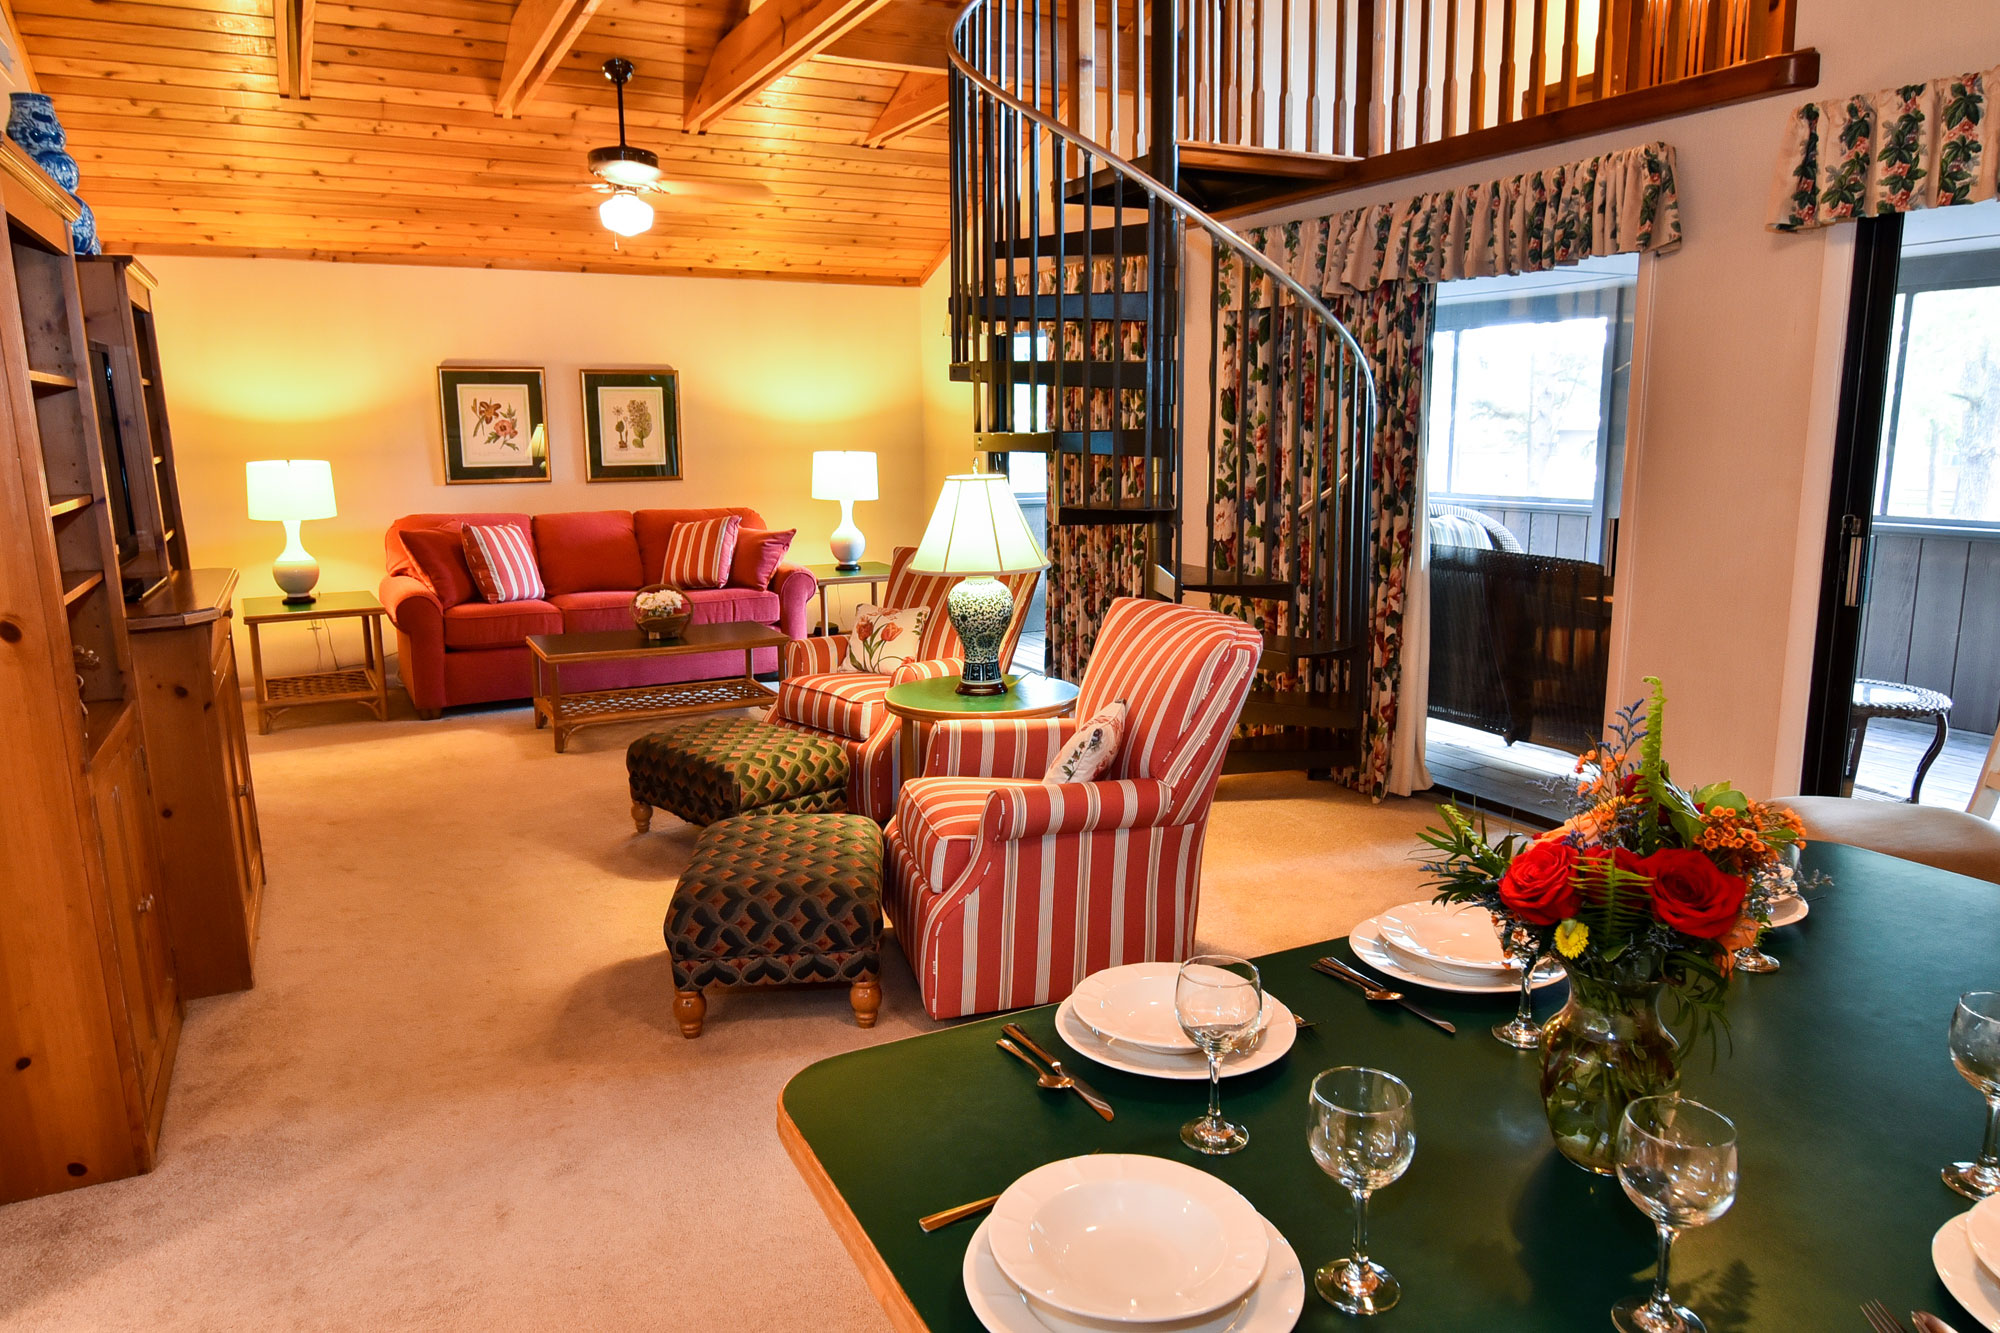 A cozy room with cream carpet and wooden cathedral ceilings. There are two armchairs and a red sleeper sofa. There is a spiral staircase leading to a loft, and several sliding doors leading to a private screened deck.